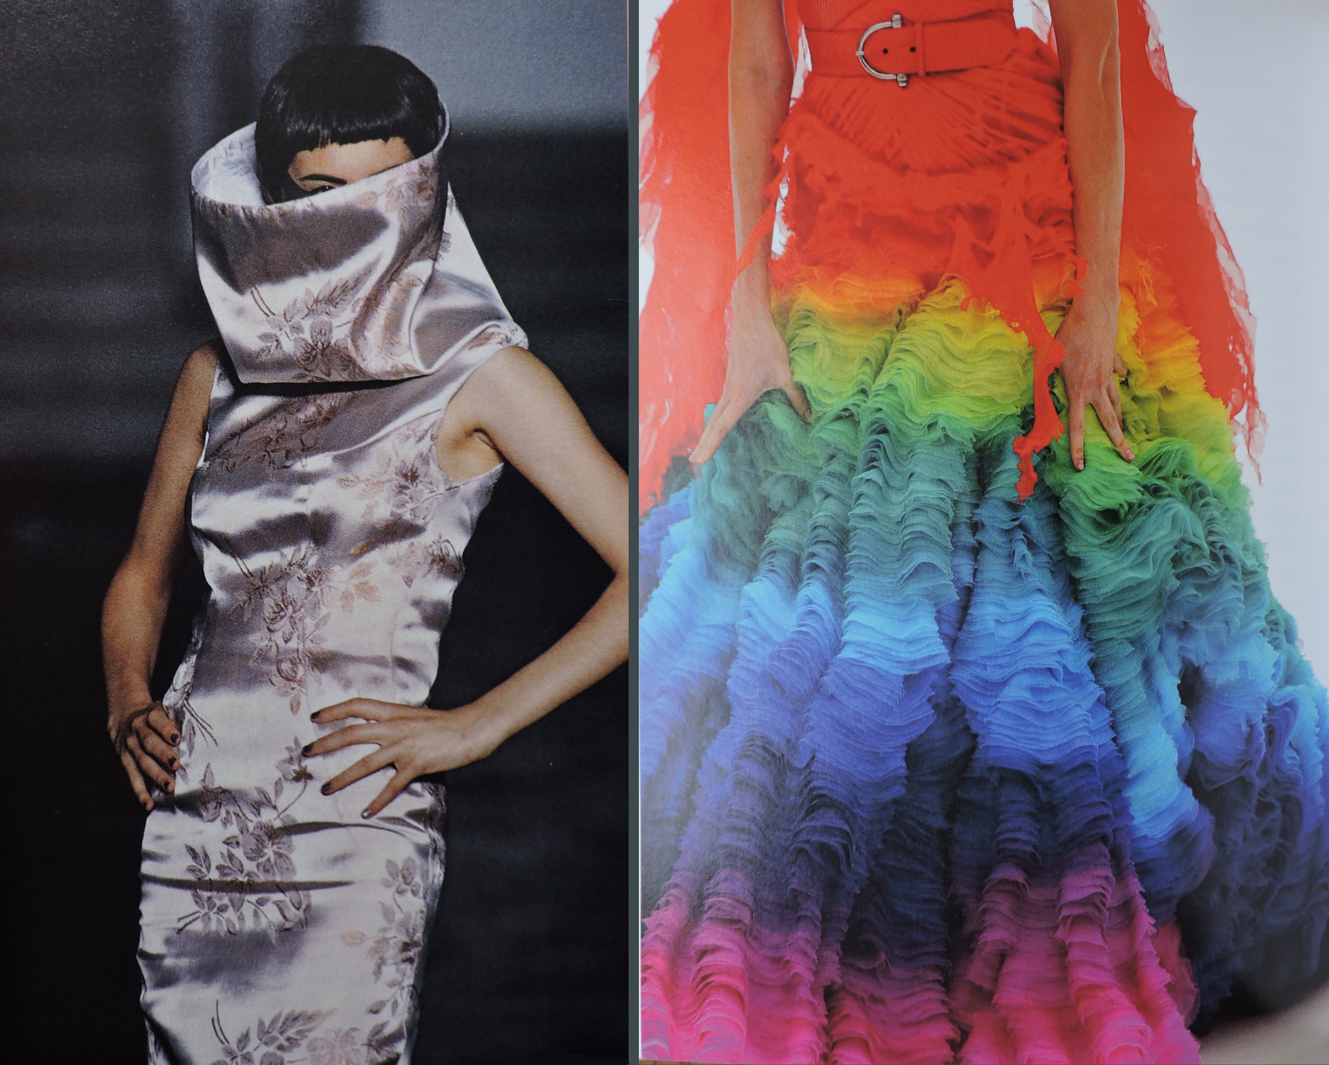 Collar and color. On the left: funnel necked dress, "Bellmer la Poupée," SS 1997. On the right: detail, silk chiffon rainbow dress, "Irere," SS 2003